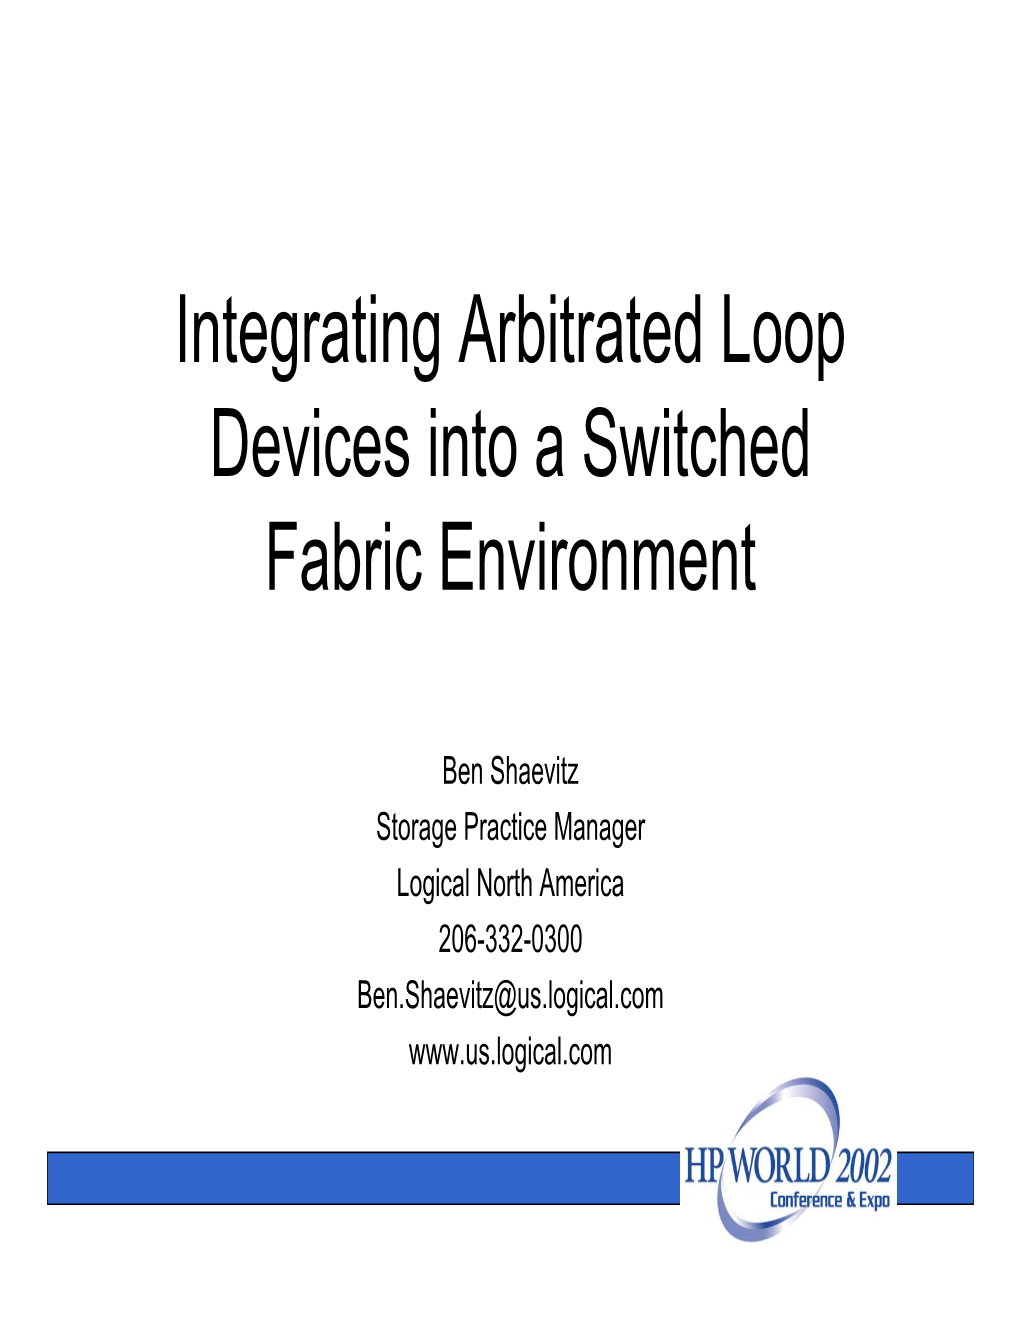 Integrating Arbitrated Loop Devices Into a Switched Fabric Environment